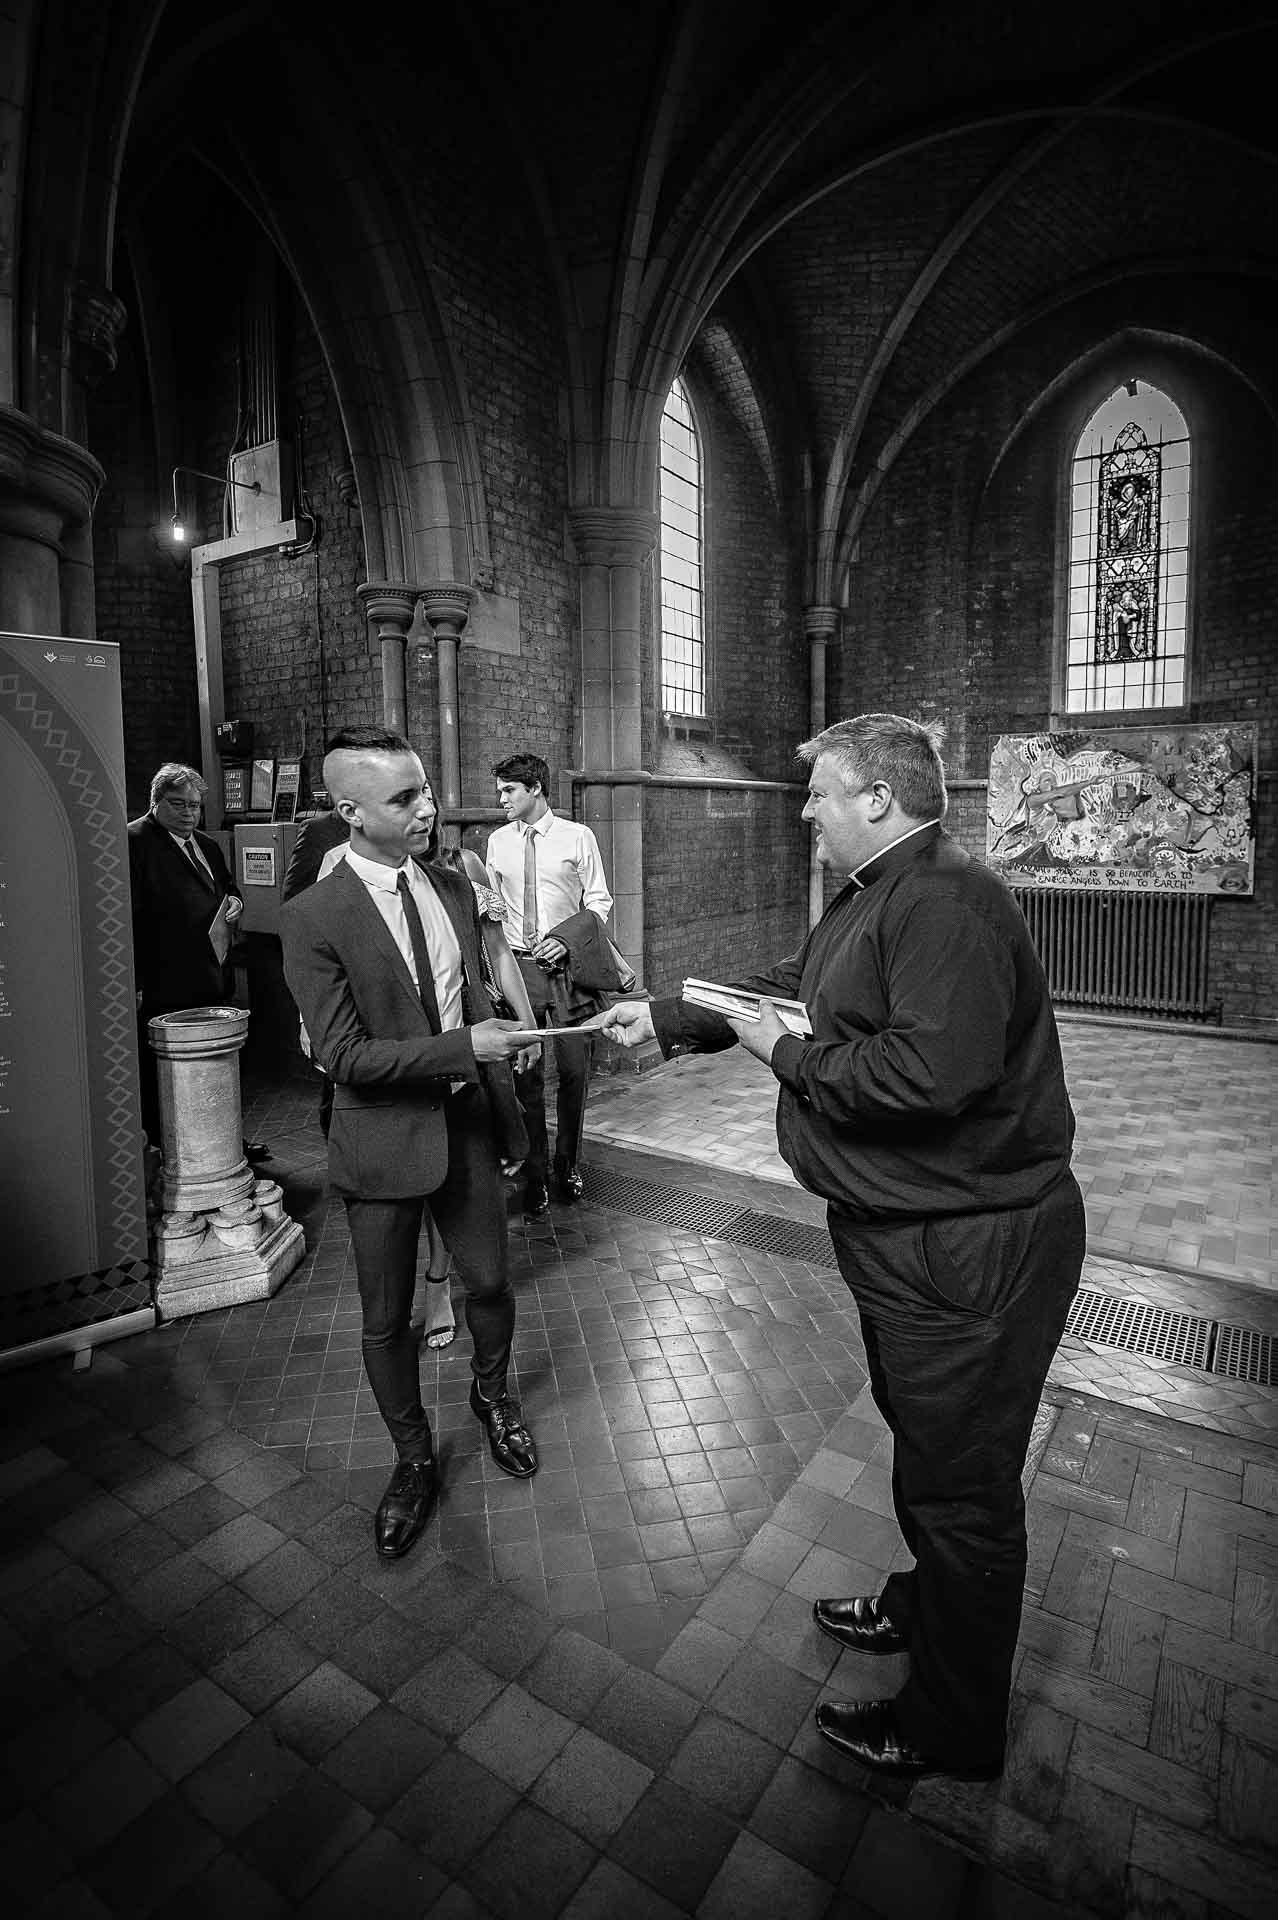 Vicar giving out order of service to guest at a wedding